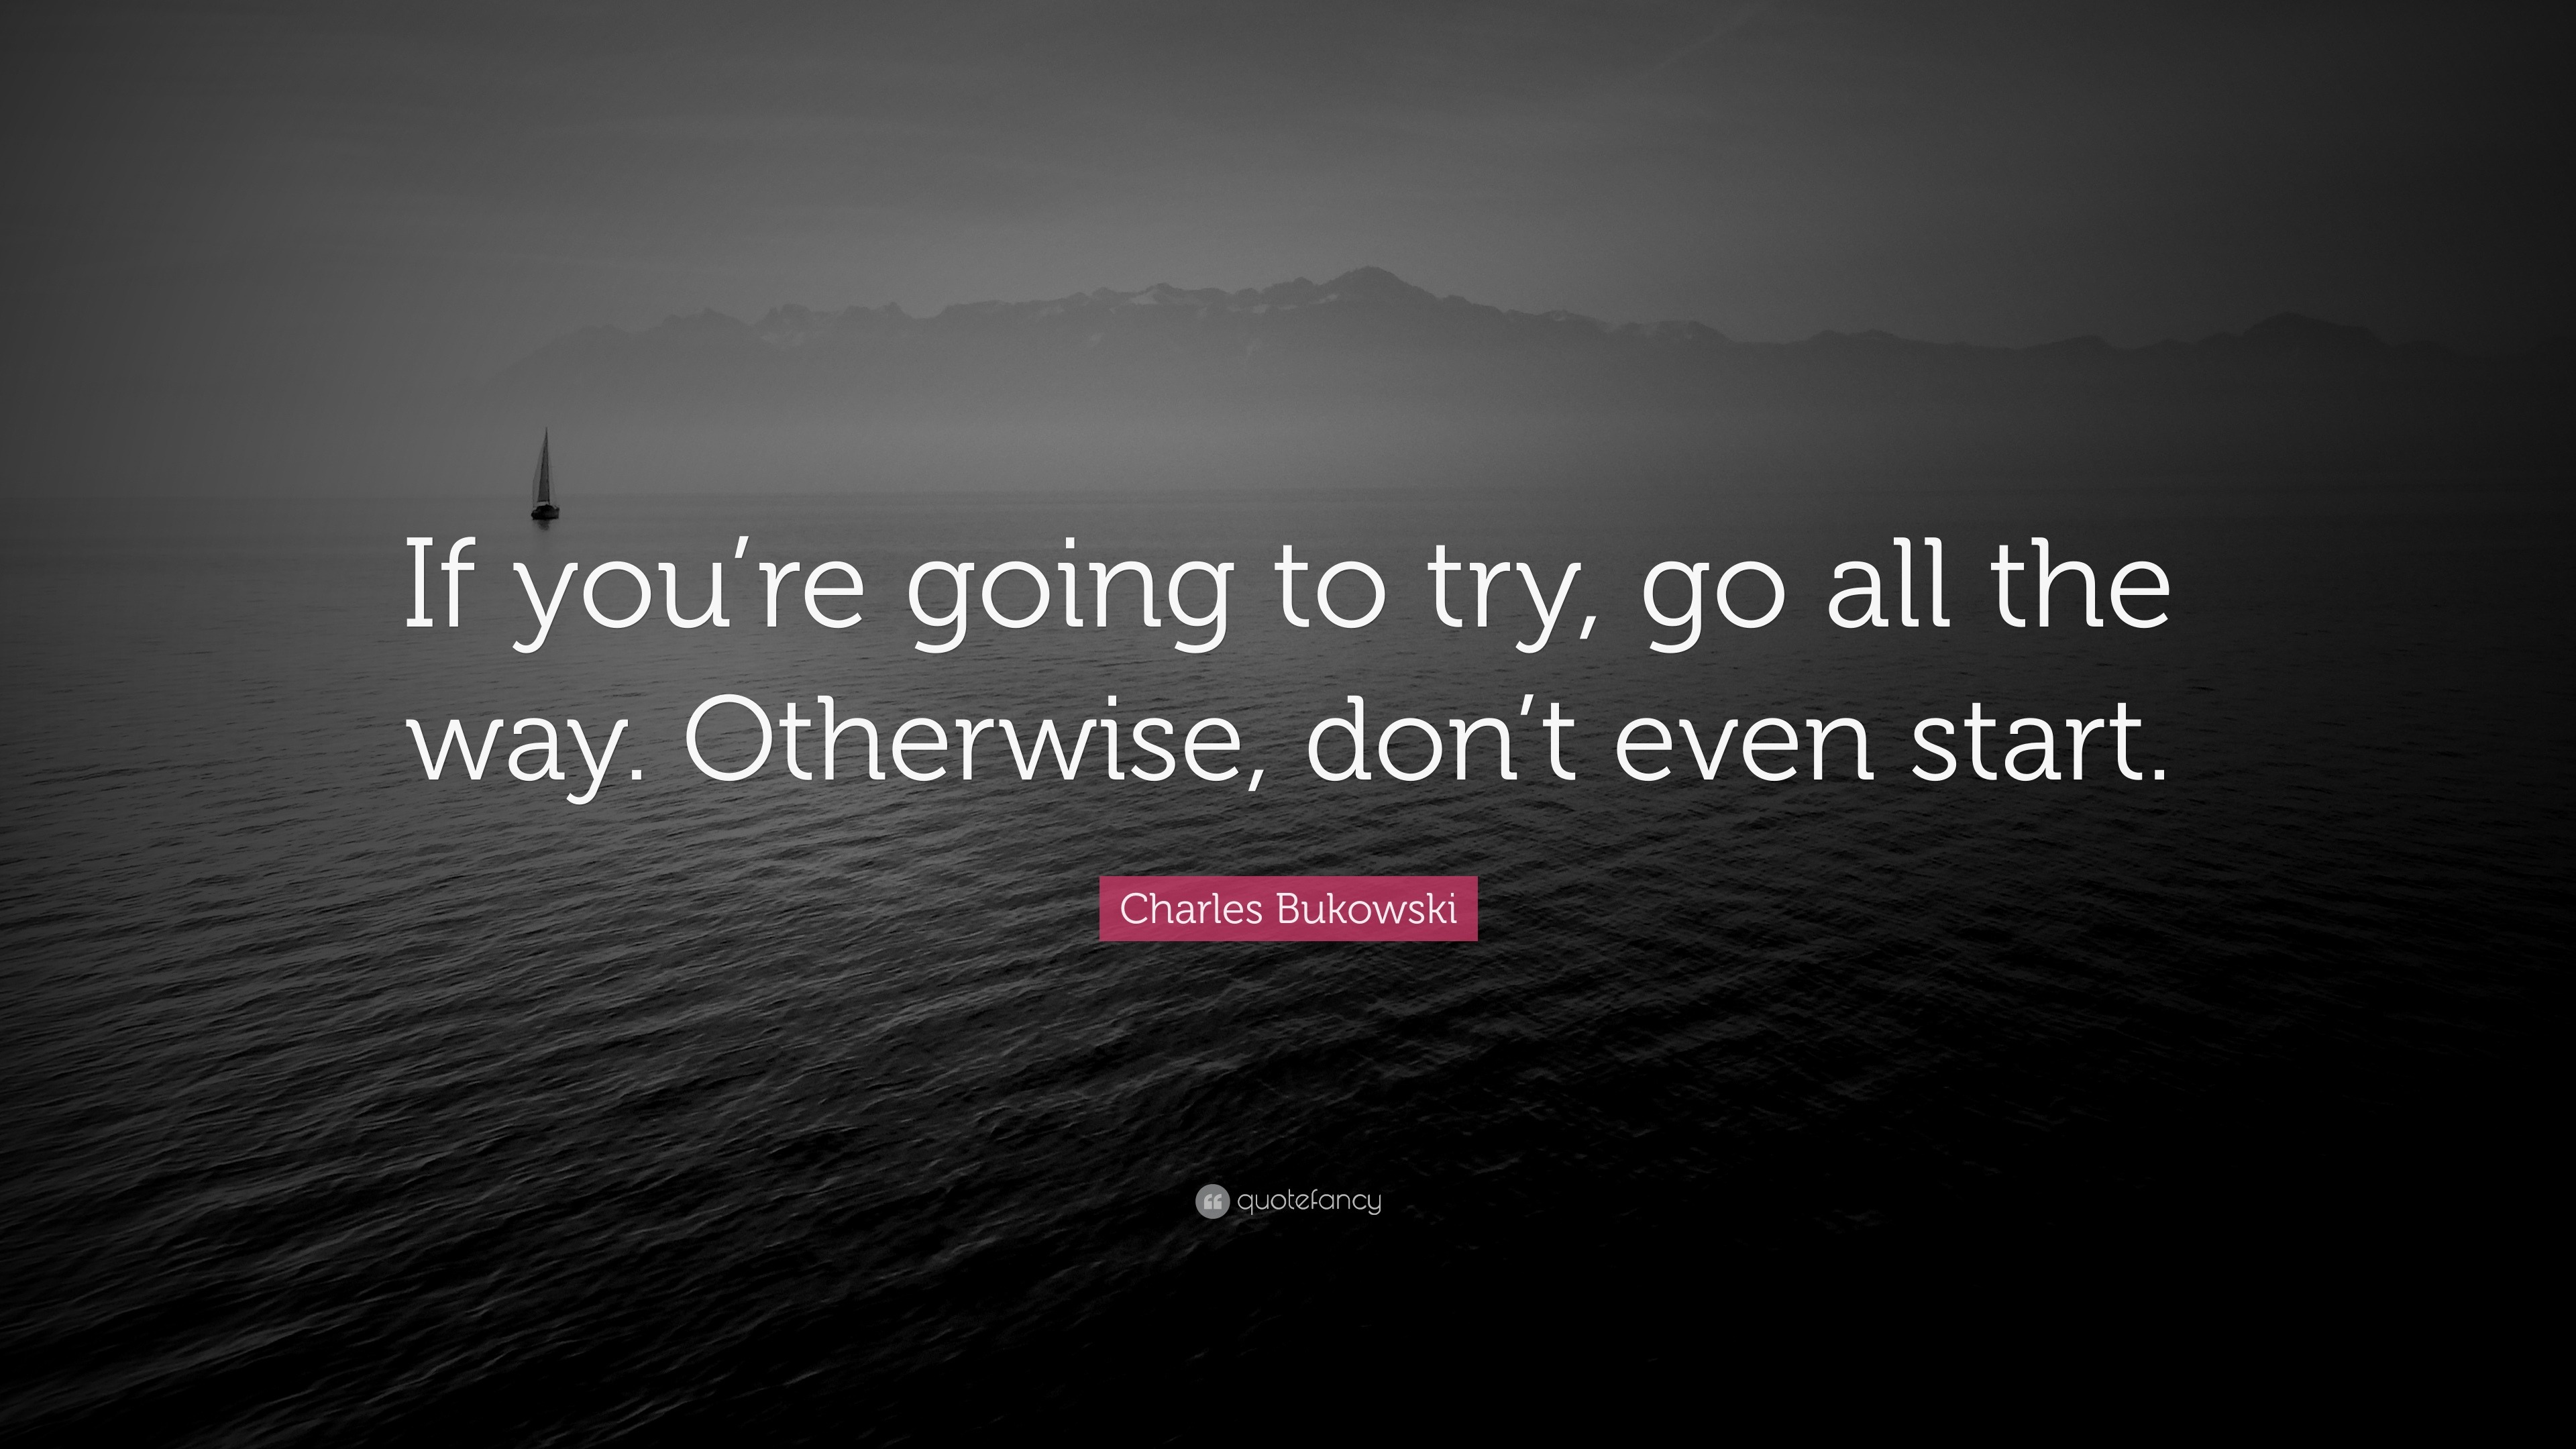 Charles Bukowski Quote: “If you’re going to try, go all the way